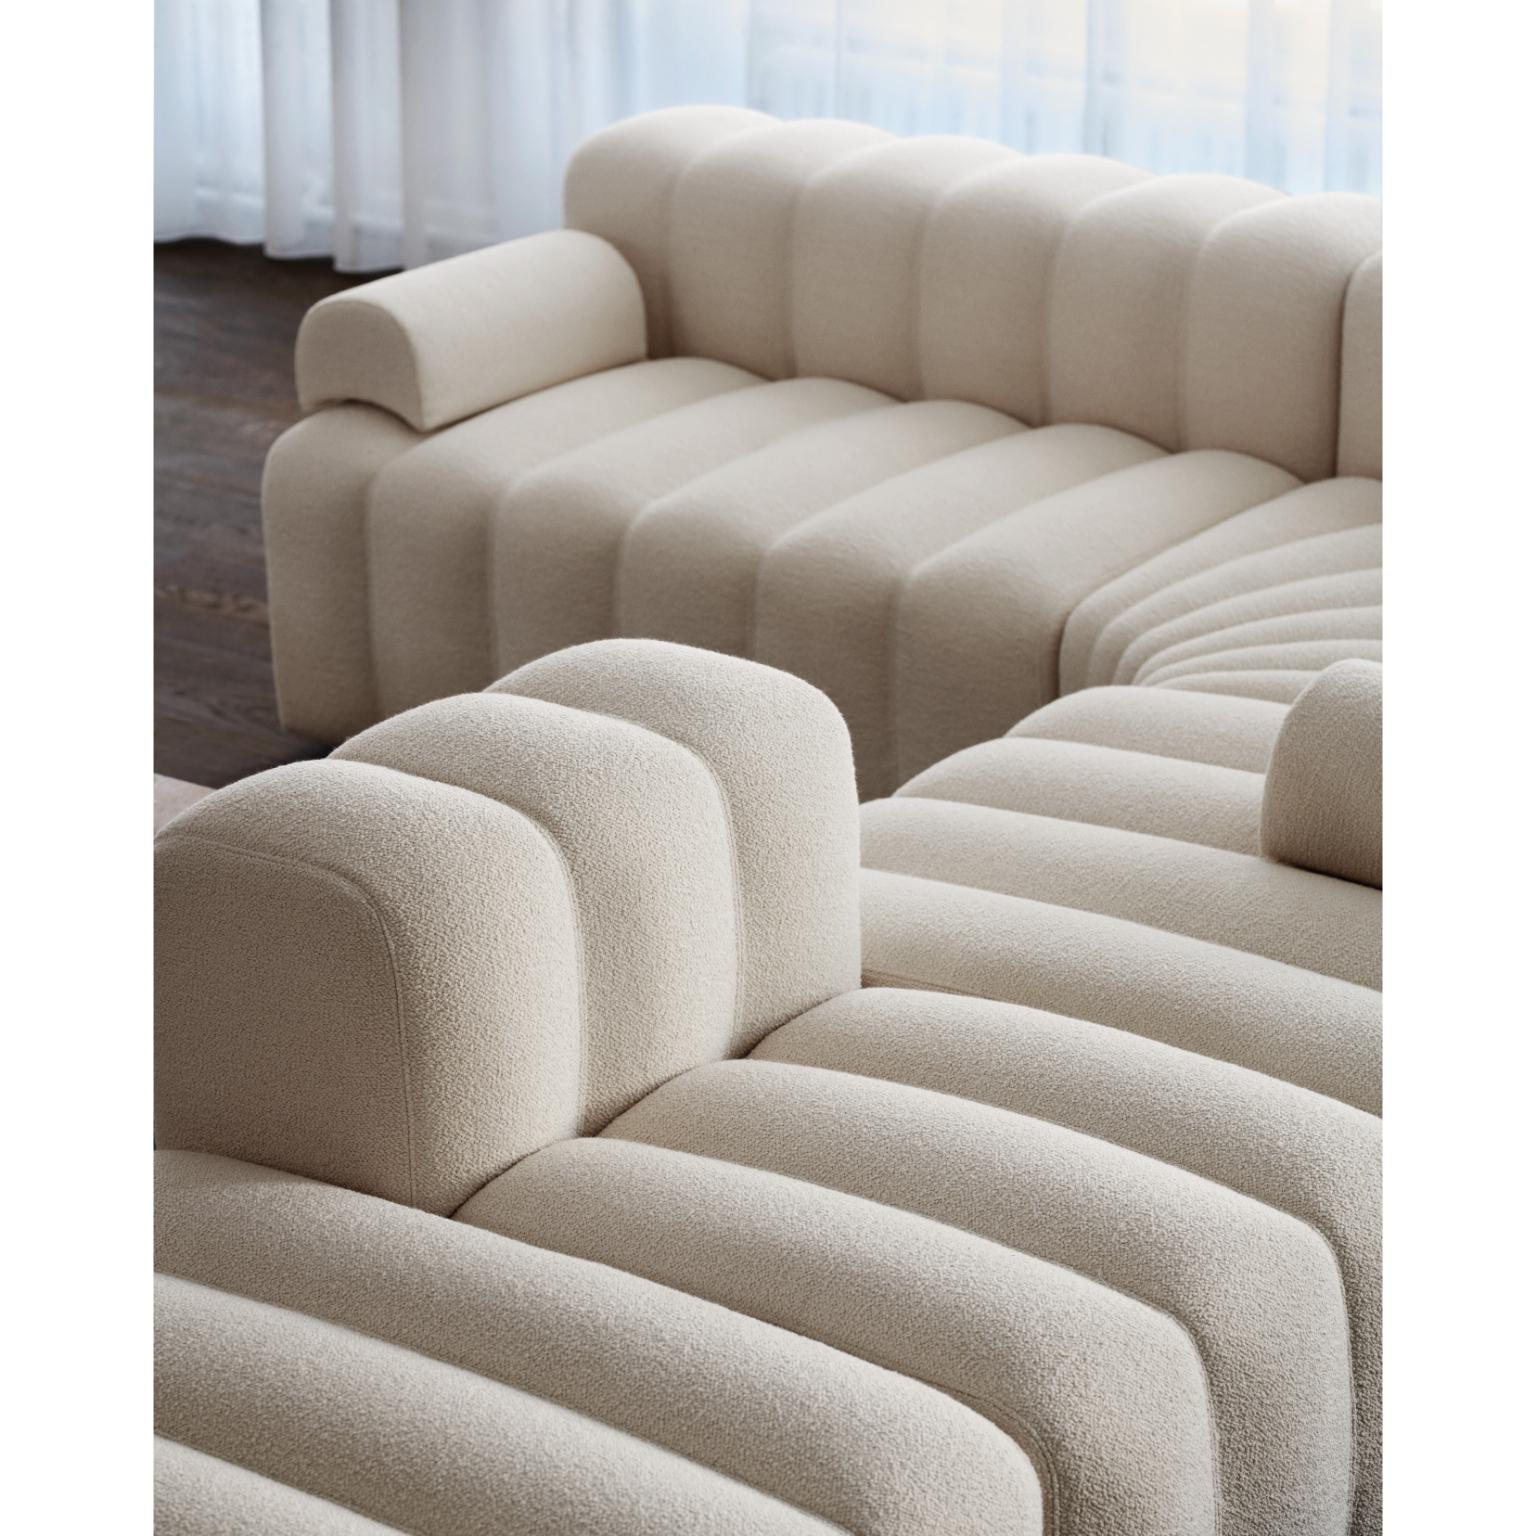 Studio Lounge Large Modular Sofa by NORR11
Dimensions: D 130 x W 120 x H 70 cm. SH 47 cm. 
Materials: Foam, wood and upholstery.
Upholstery: Barnum Boucle Color 3.

Available in different upholstery options. A plywood structure with elastic belts &